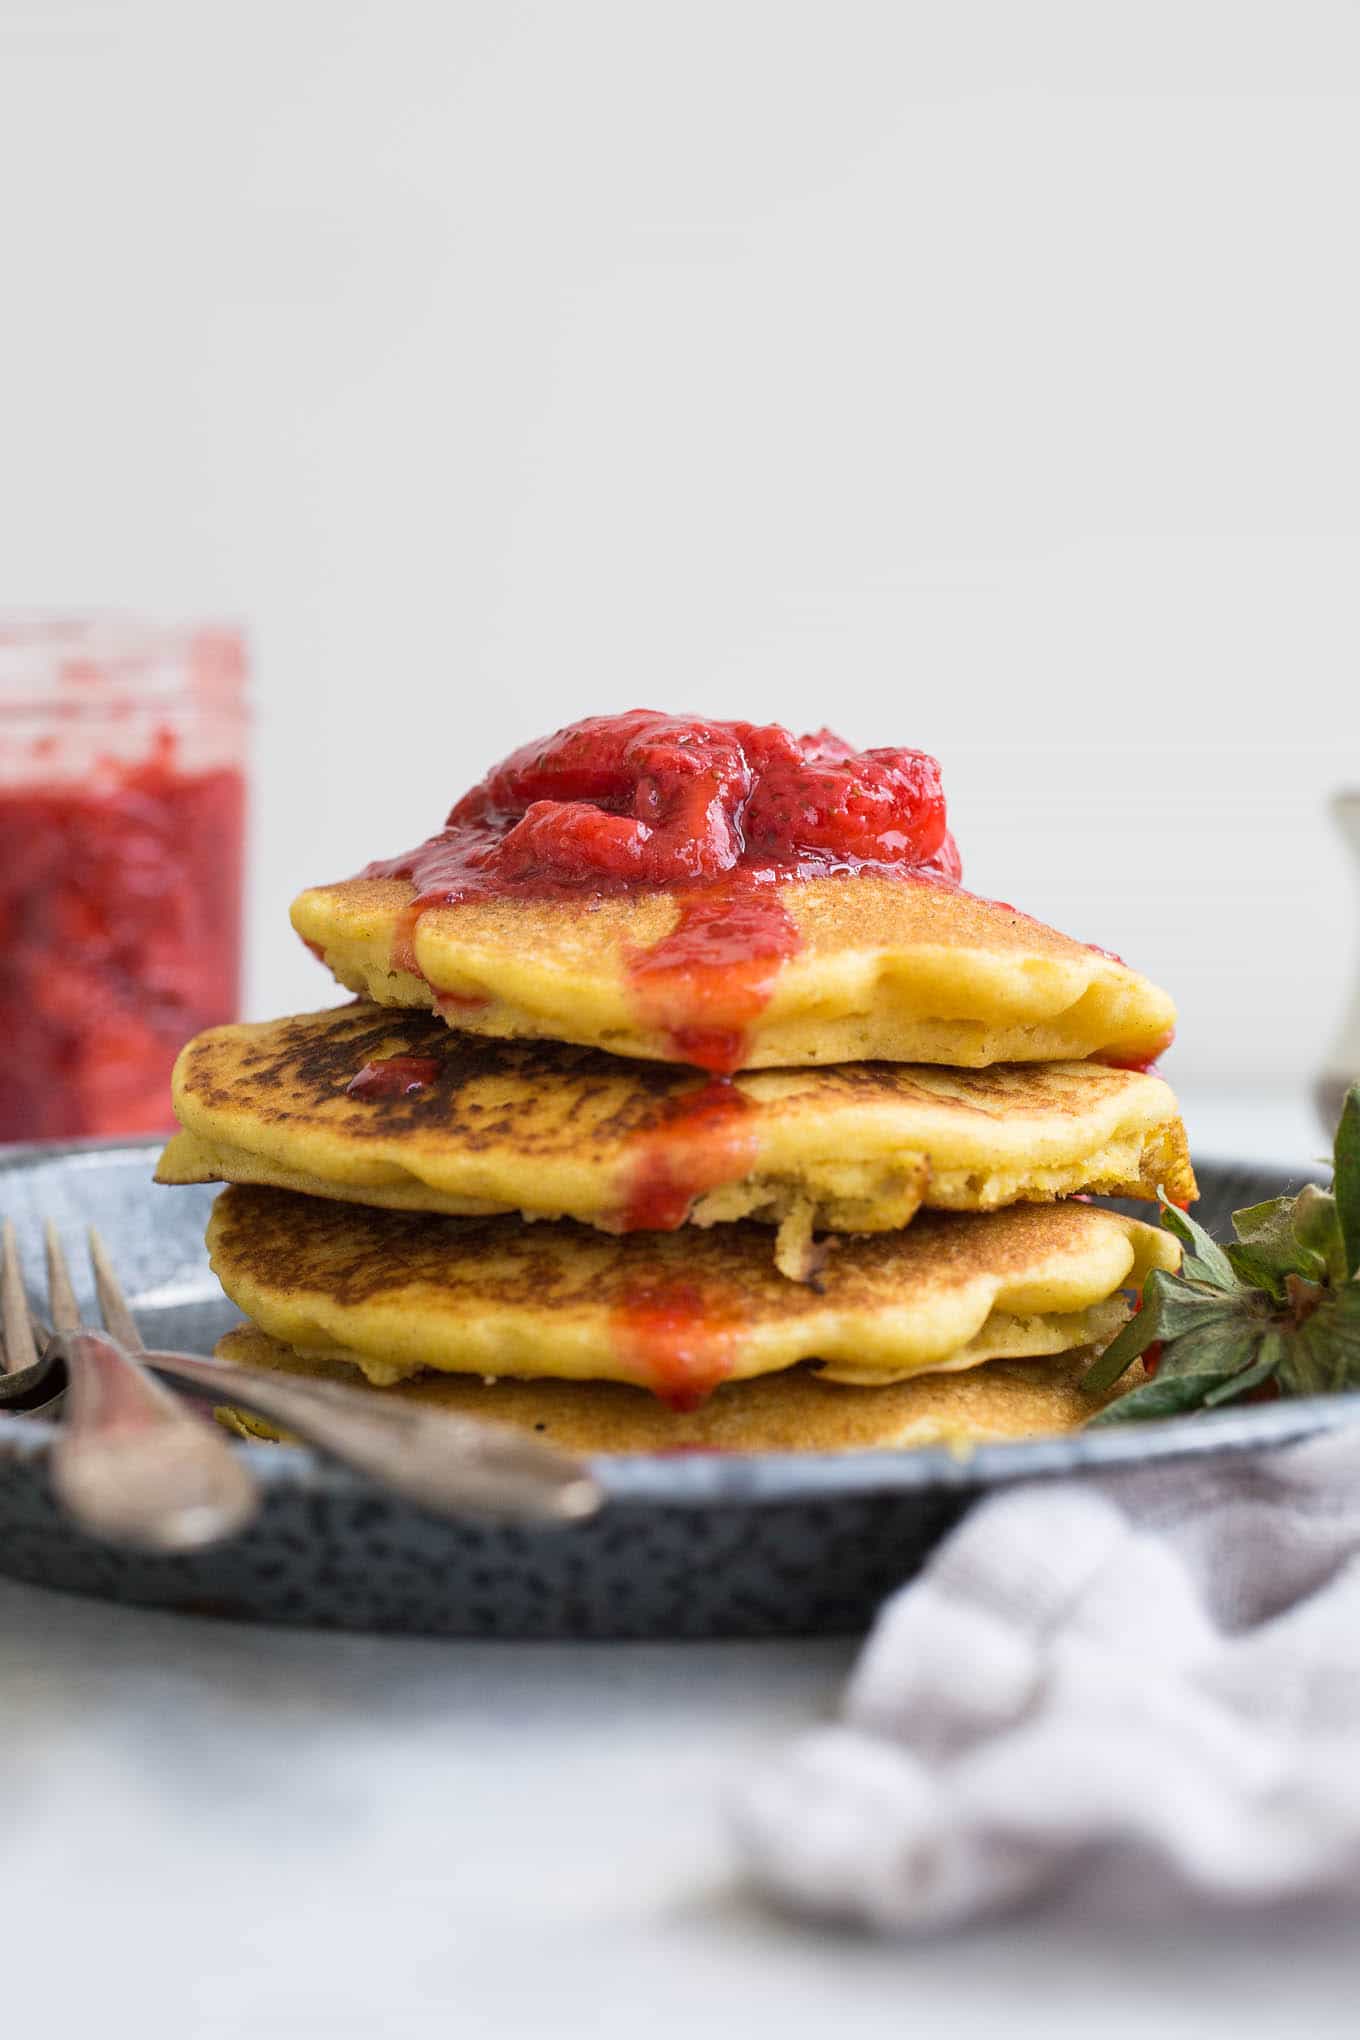 corn flour pancake stack with strawberry compote on top.